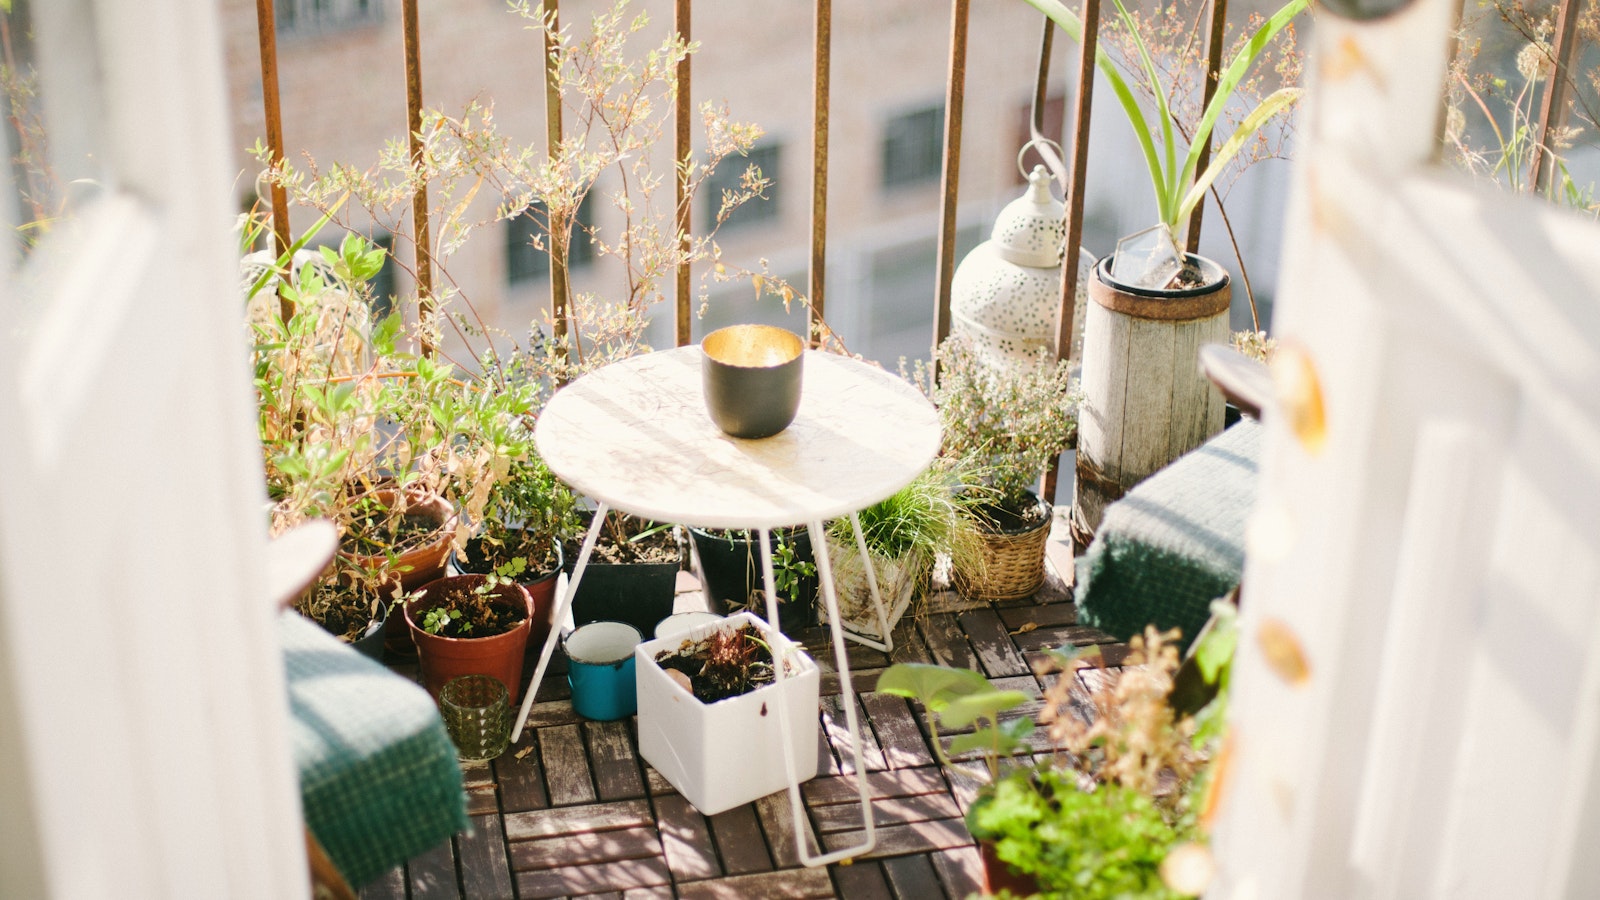 How To Make The Most Of A Balcony